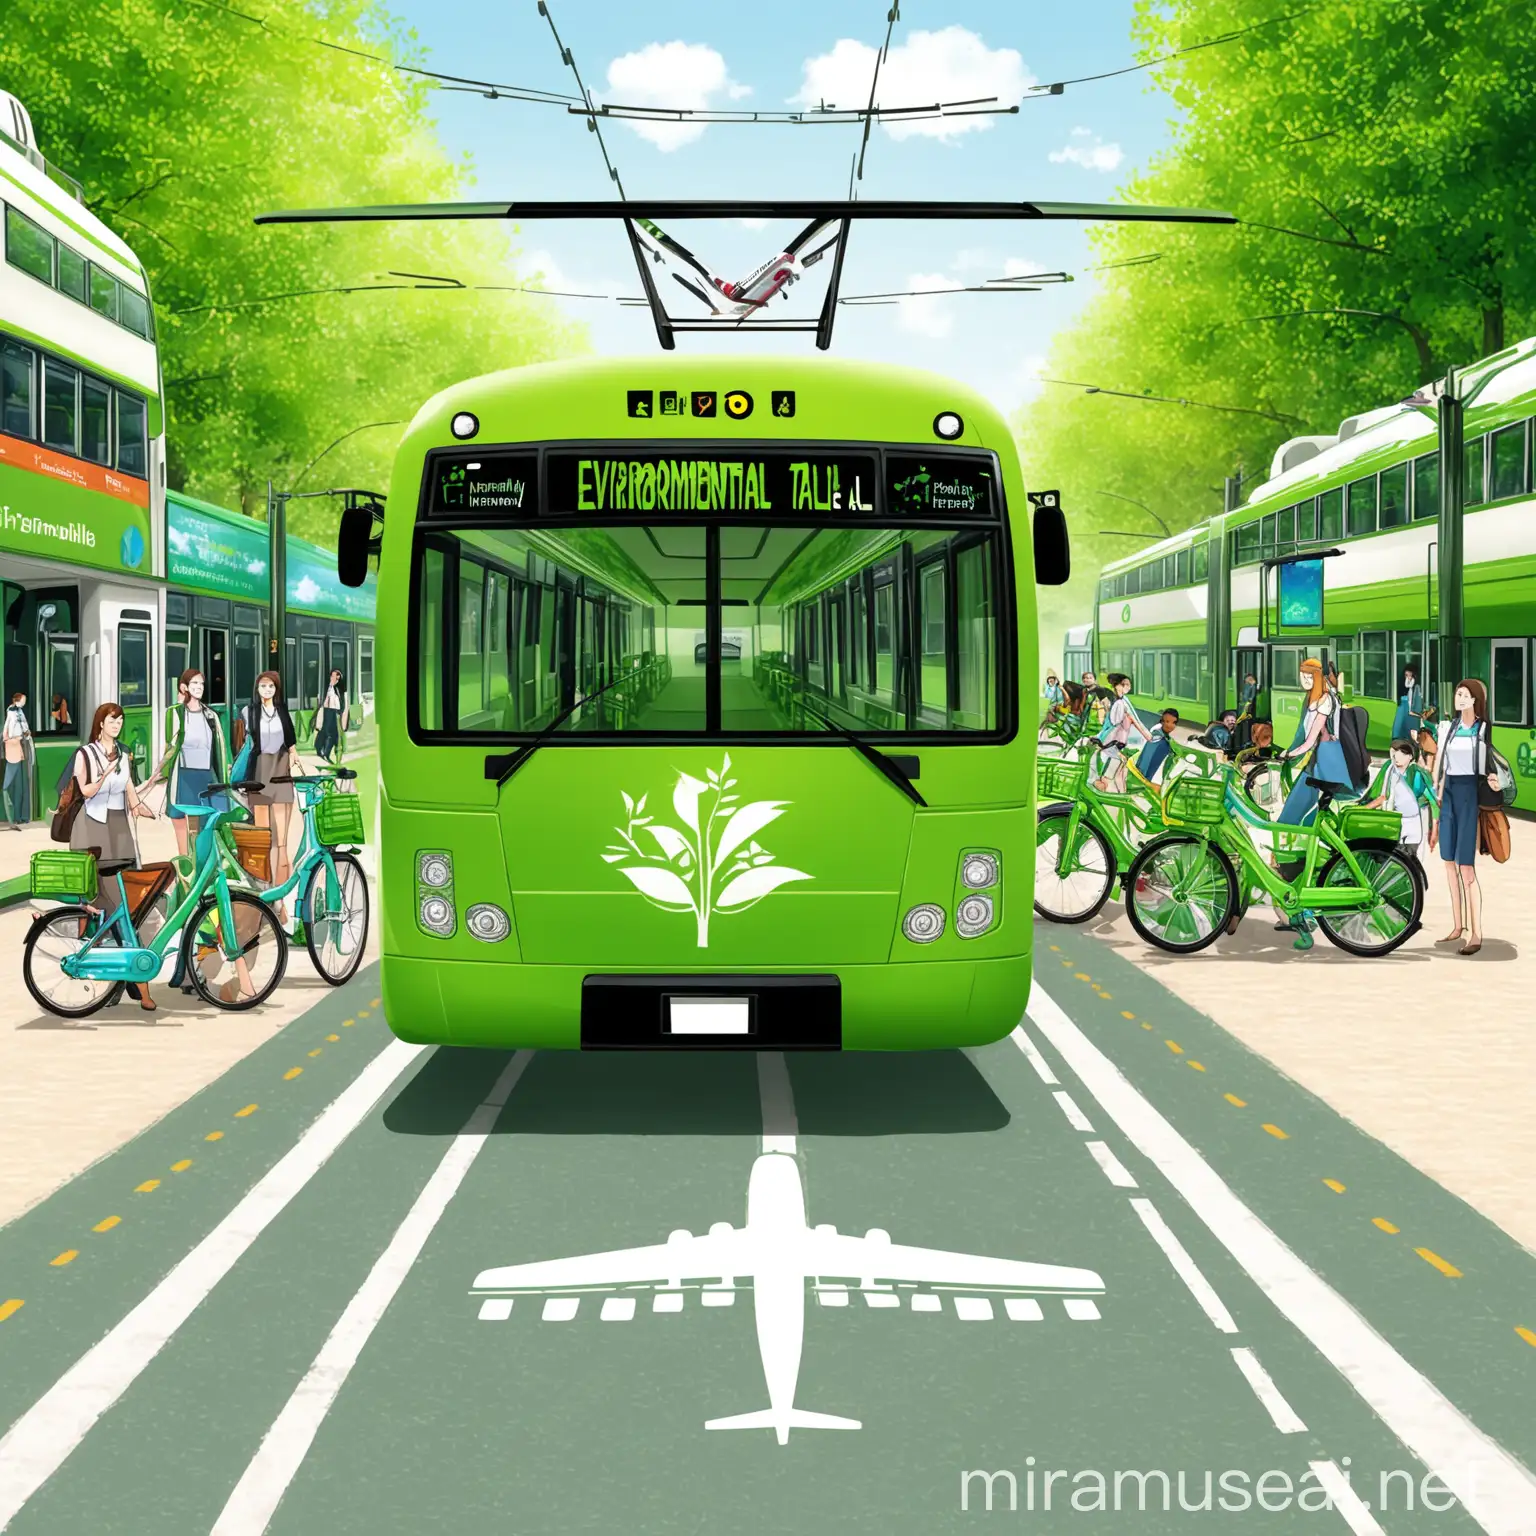 Sustainable Transportation Modes EcoFriendly Airplanes Buses Trains and Bikes in Urban Environment